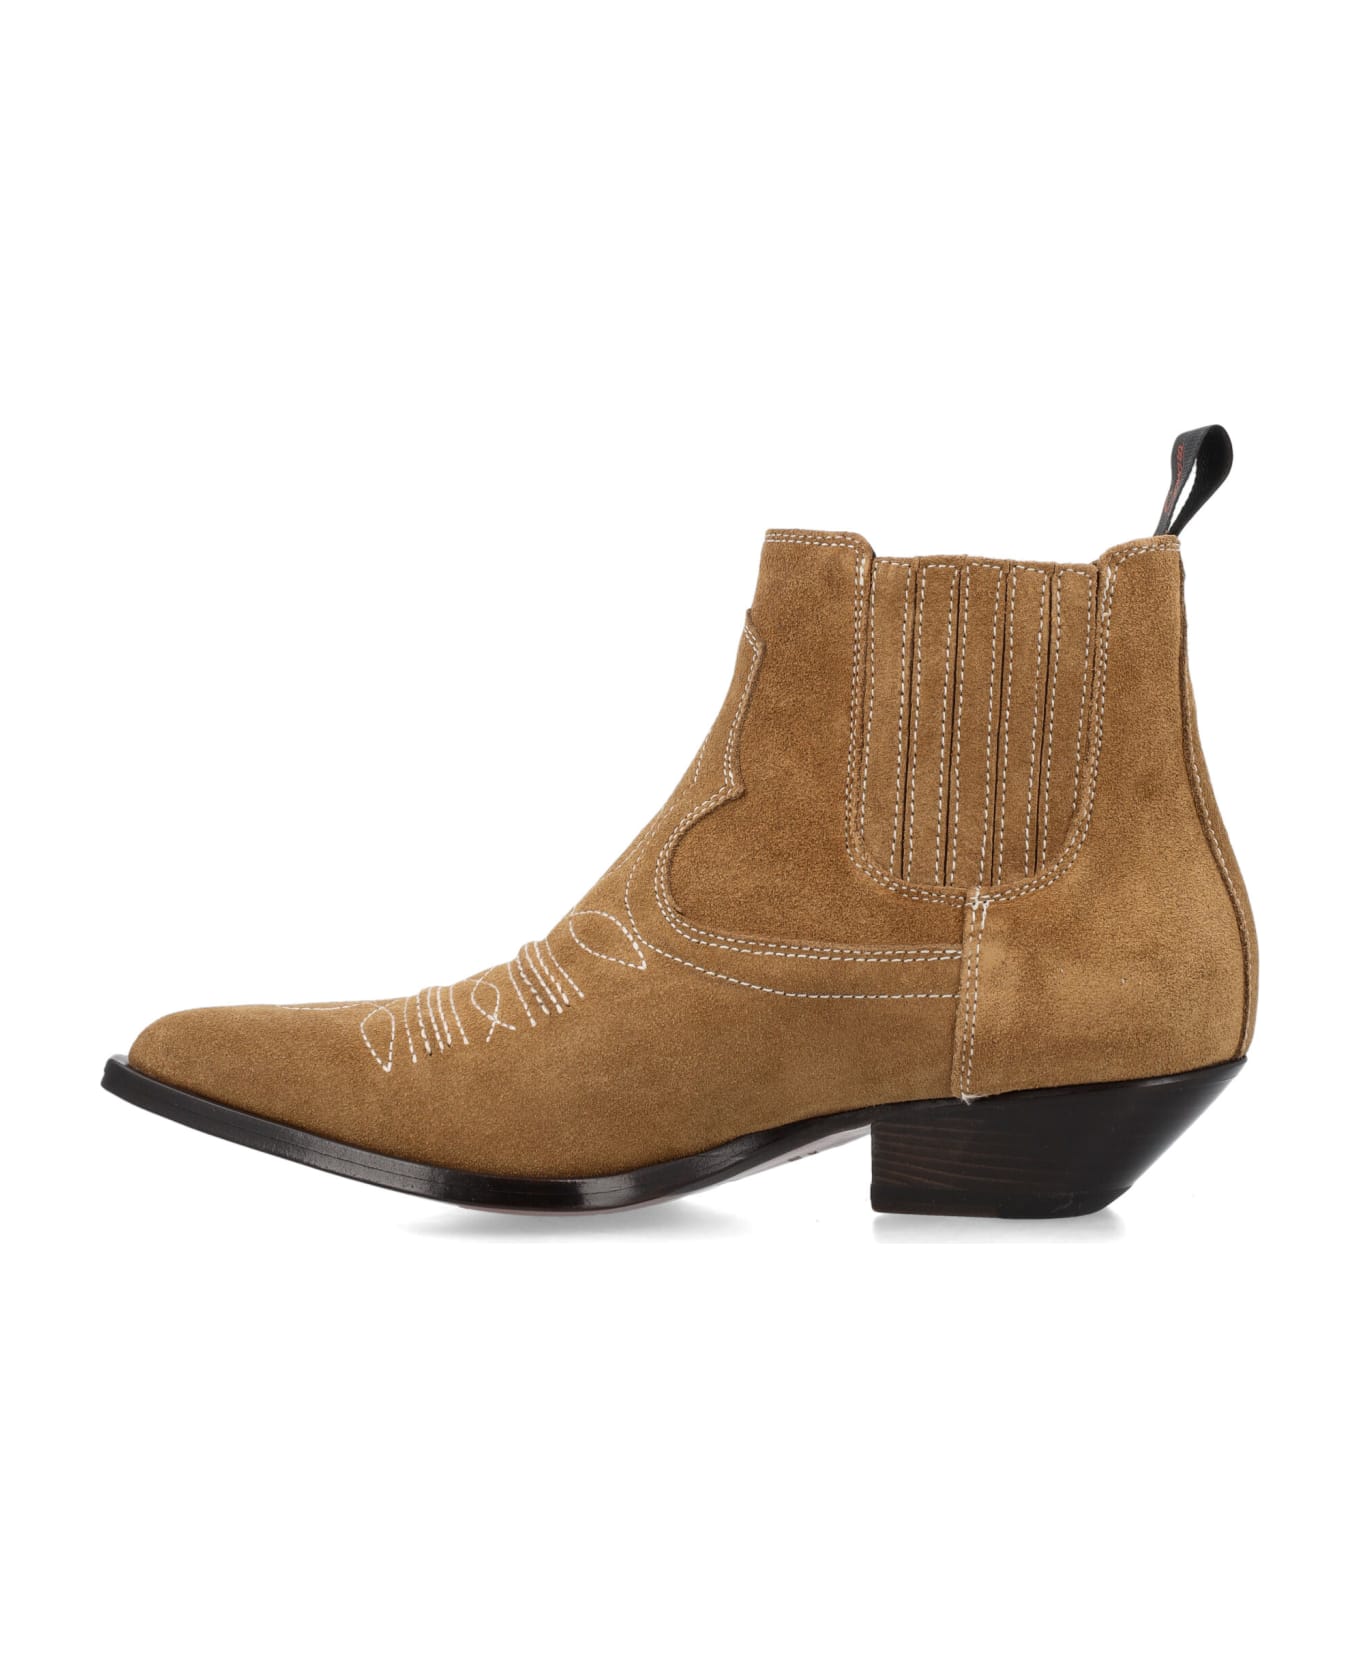 Sonora Idalgo Flower Ankle Boots - CIGAR